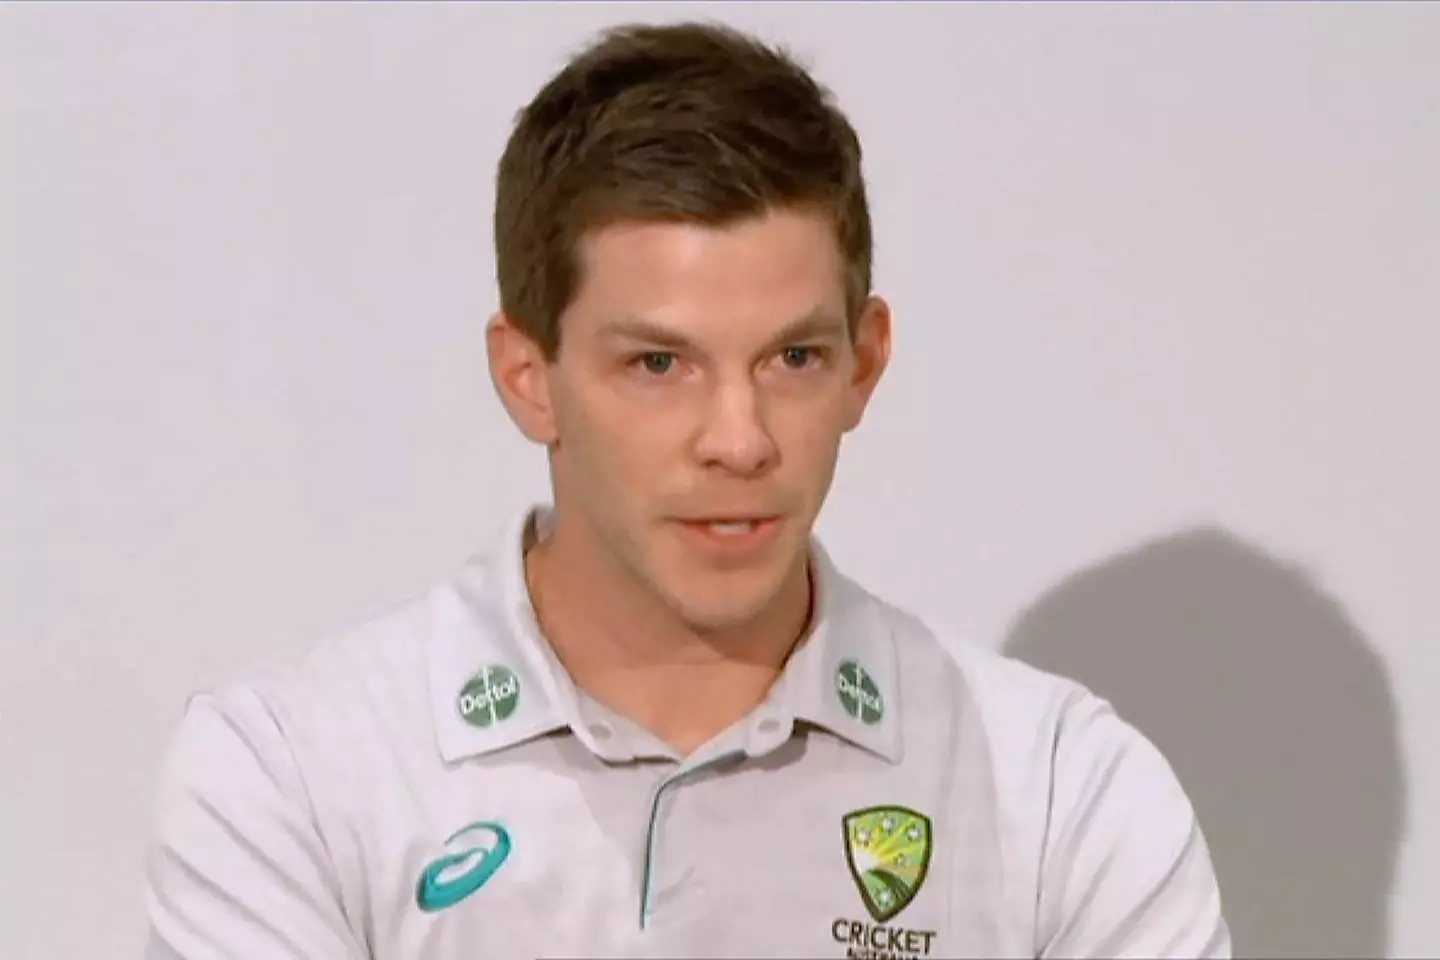 Tim Paine's brother-in-law sent explicit messages to same woman